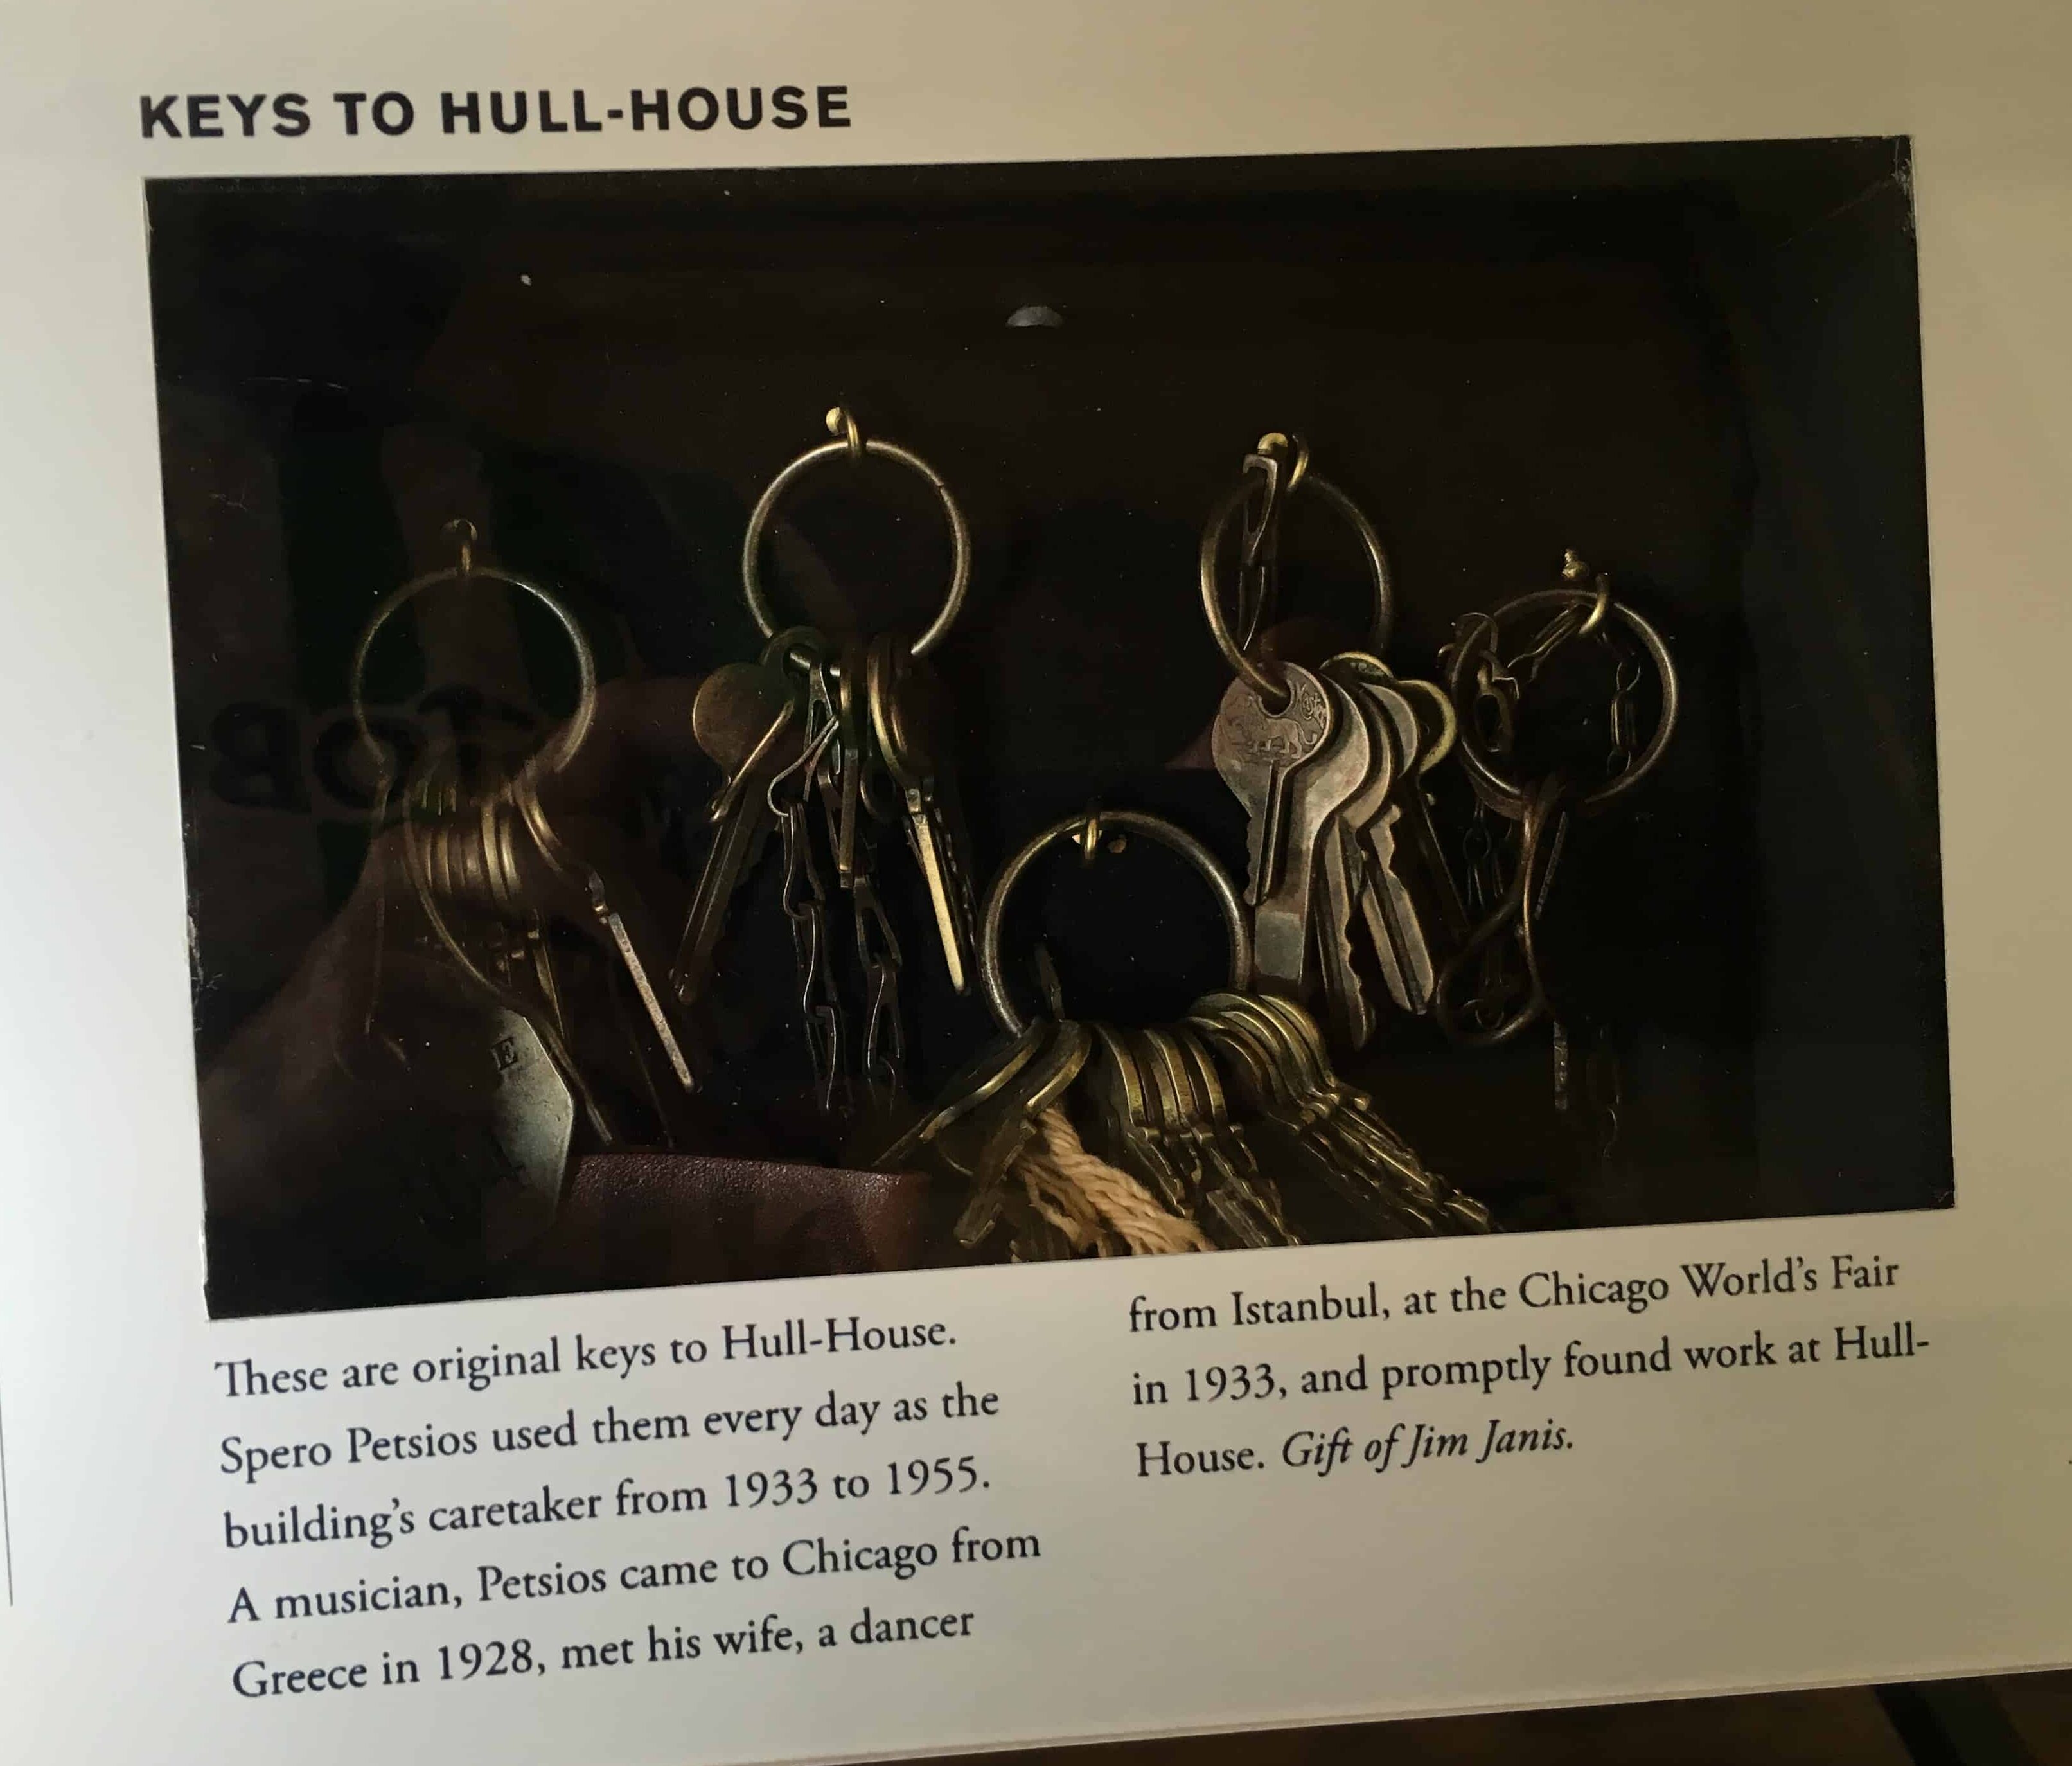 The keys to the Hull House in Chicago, Illinois